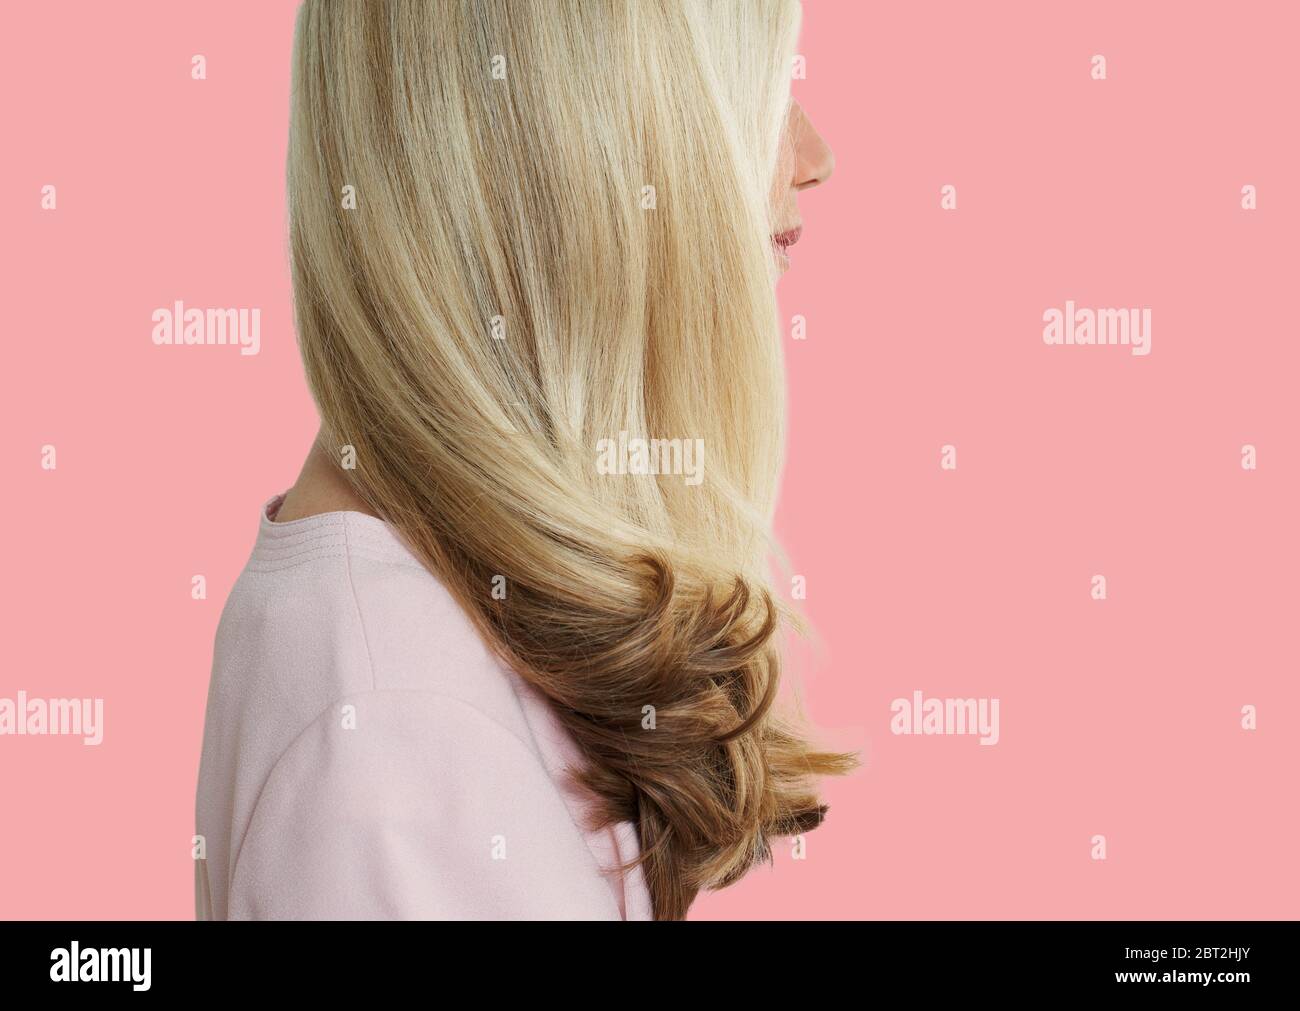 Senior woman with long blonde hair standing over pink background Stock Photo